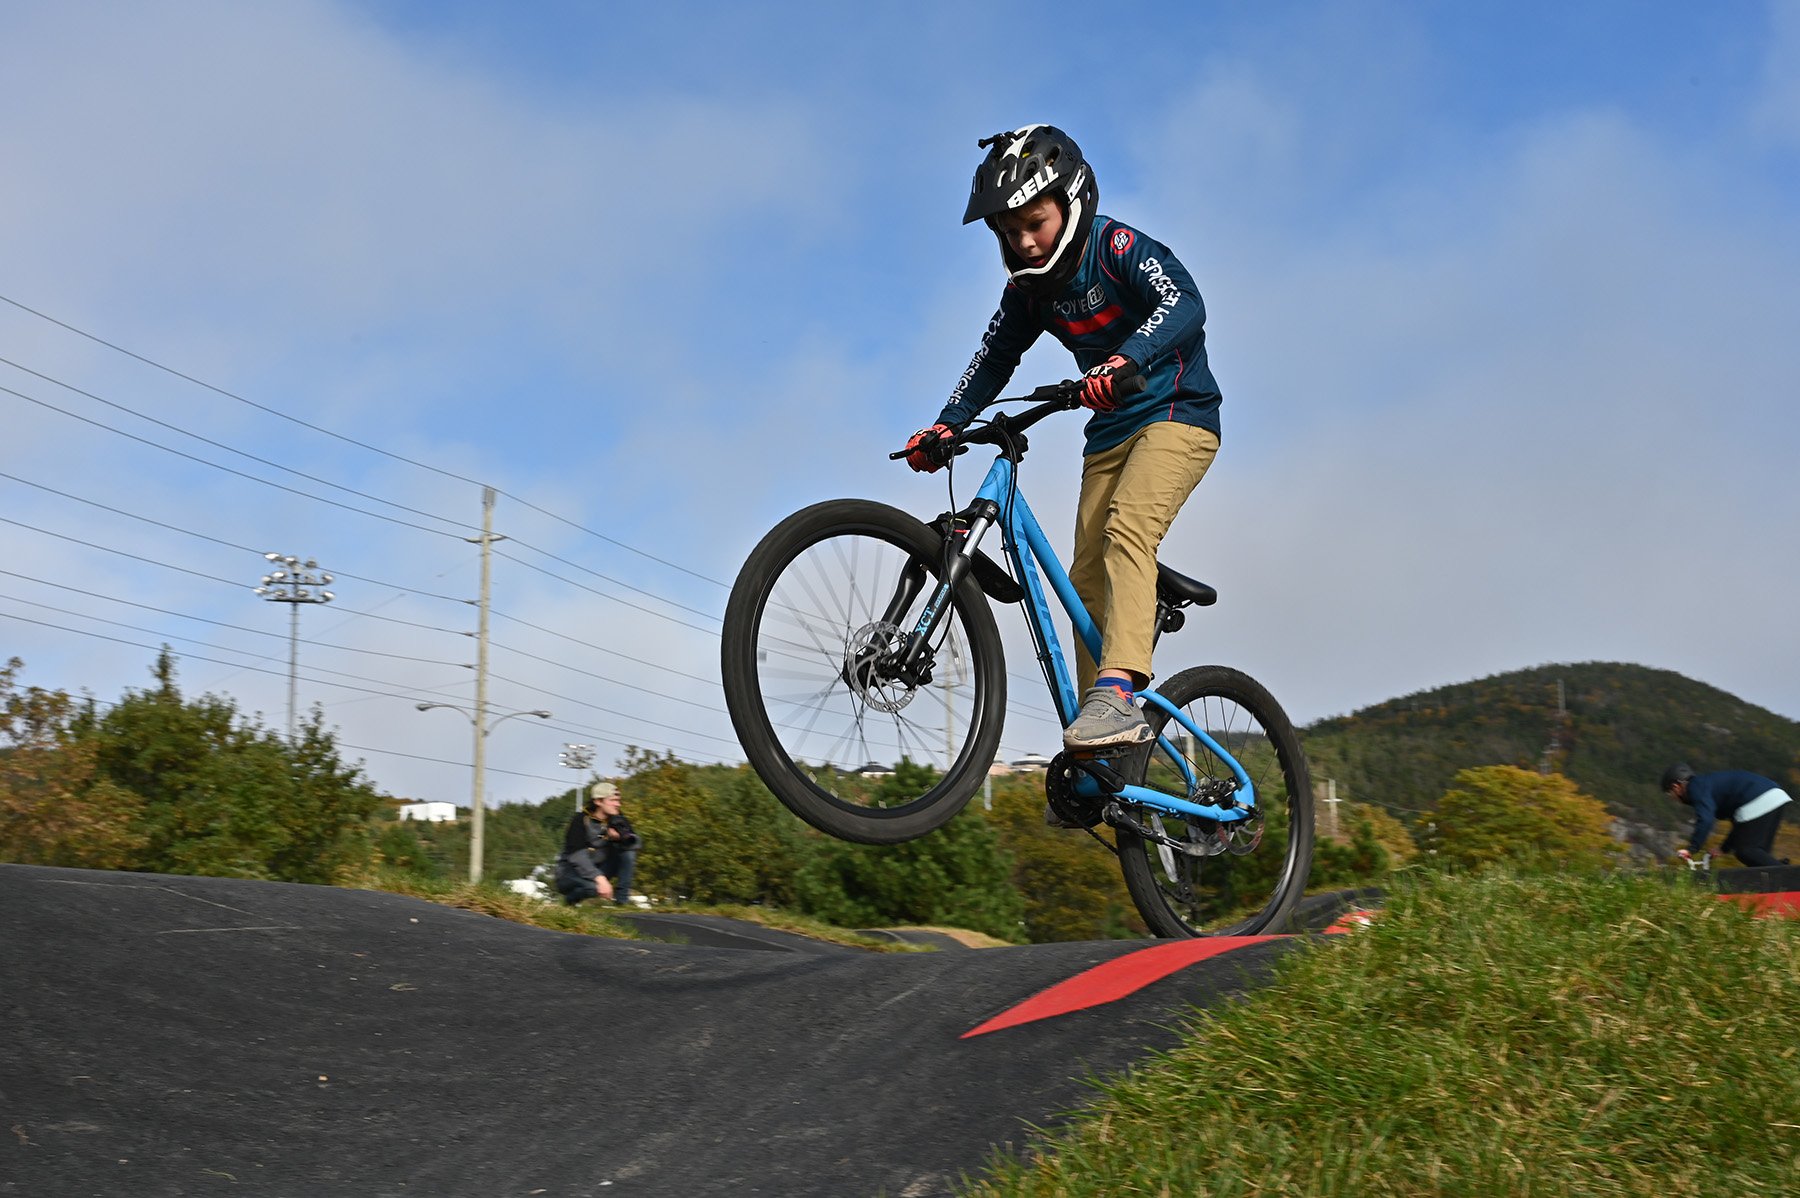 biker riding on the pump track above lens of camera against a blue sky